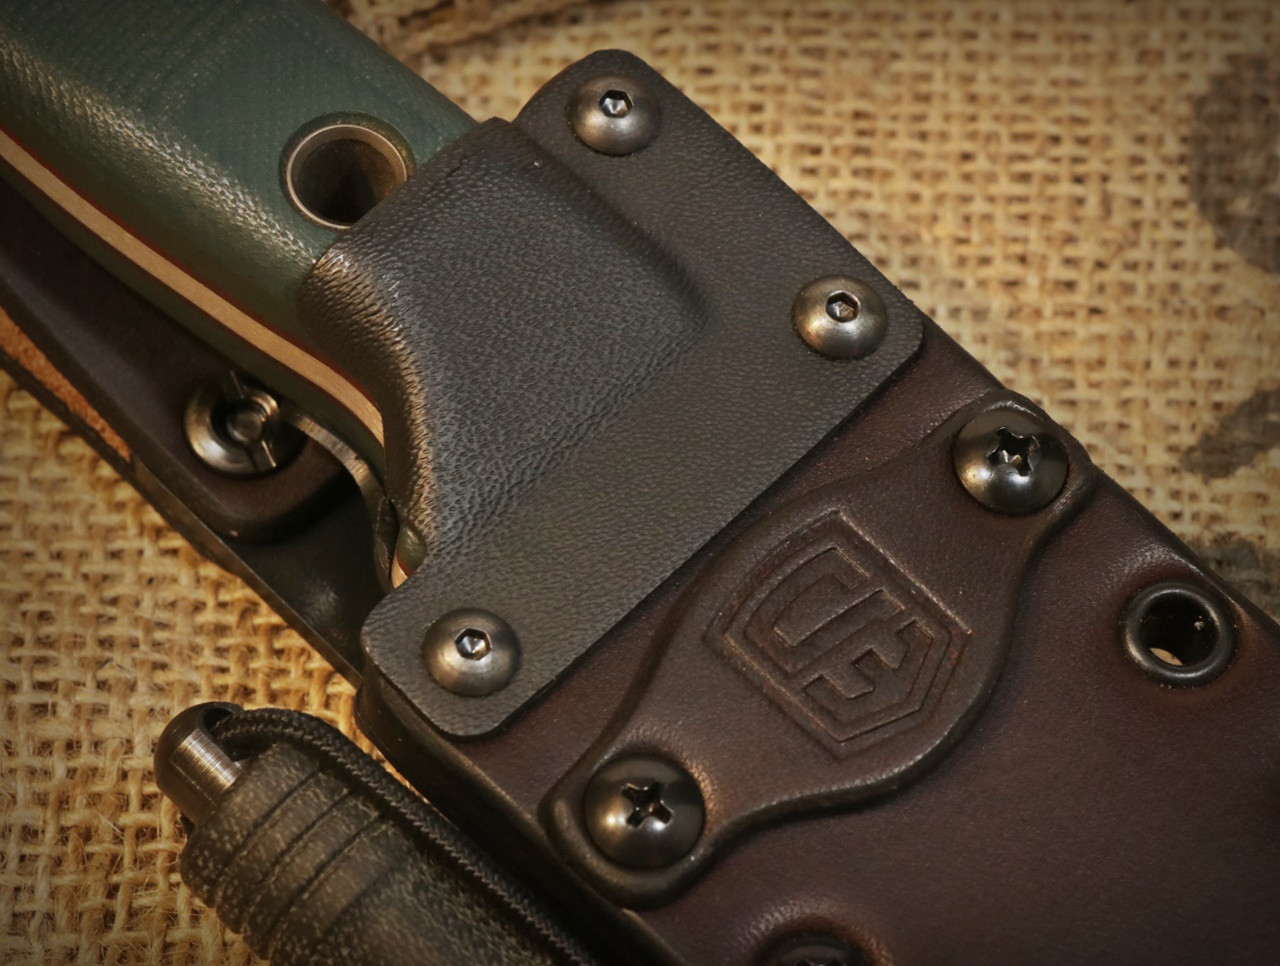 Scout Style Benchmade Bushcrafter Kydex Sheath - Grommet's Leathercraft